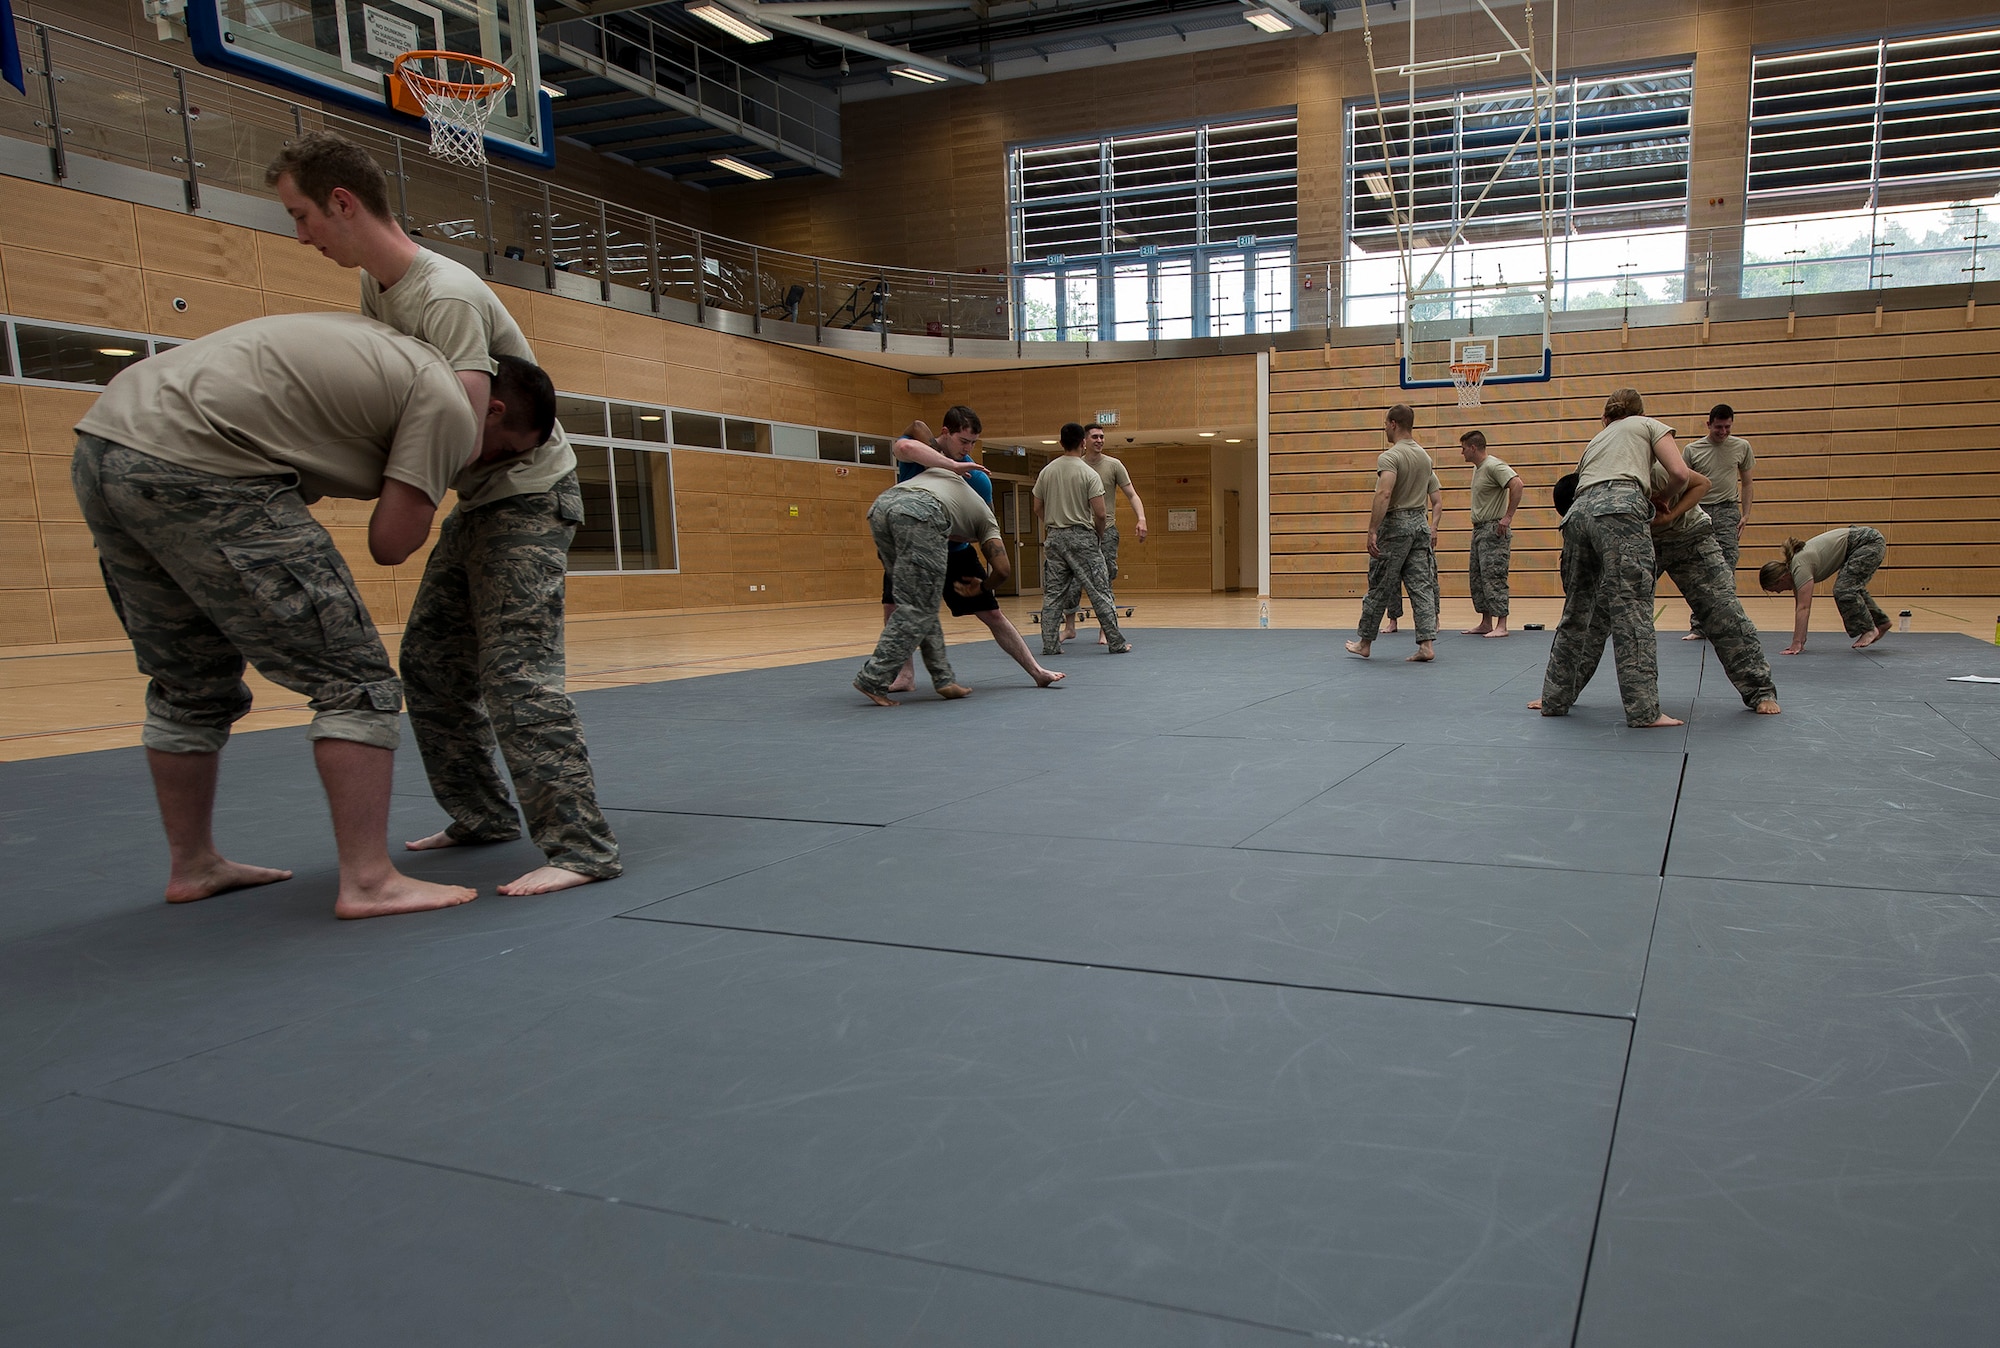 U.S. Air Force Airmen from the 52nd Security Forces Squadron undergo combatives training May 28, 2015 at the fitness center on Spangdahlem Air Base, Germany. Military law enforcement officers conduct regular hand-to-hand combat training to ensure they are prepared for any hostile suspects they might encounter. (U.S. Air Force photo by Staff Sgt. Chad Warren/Released)